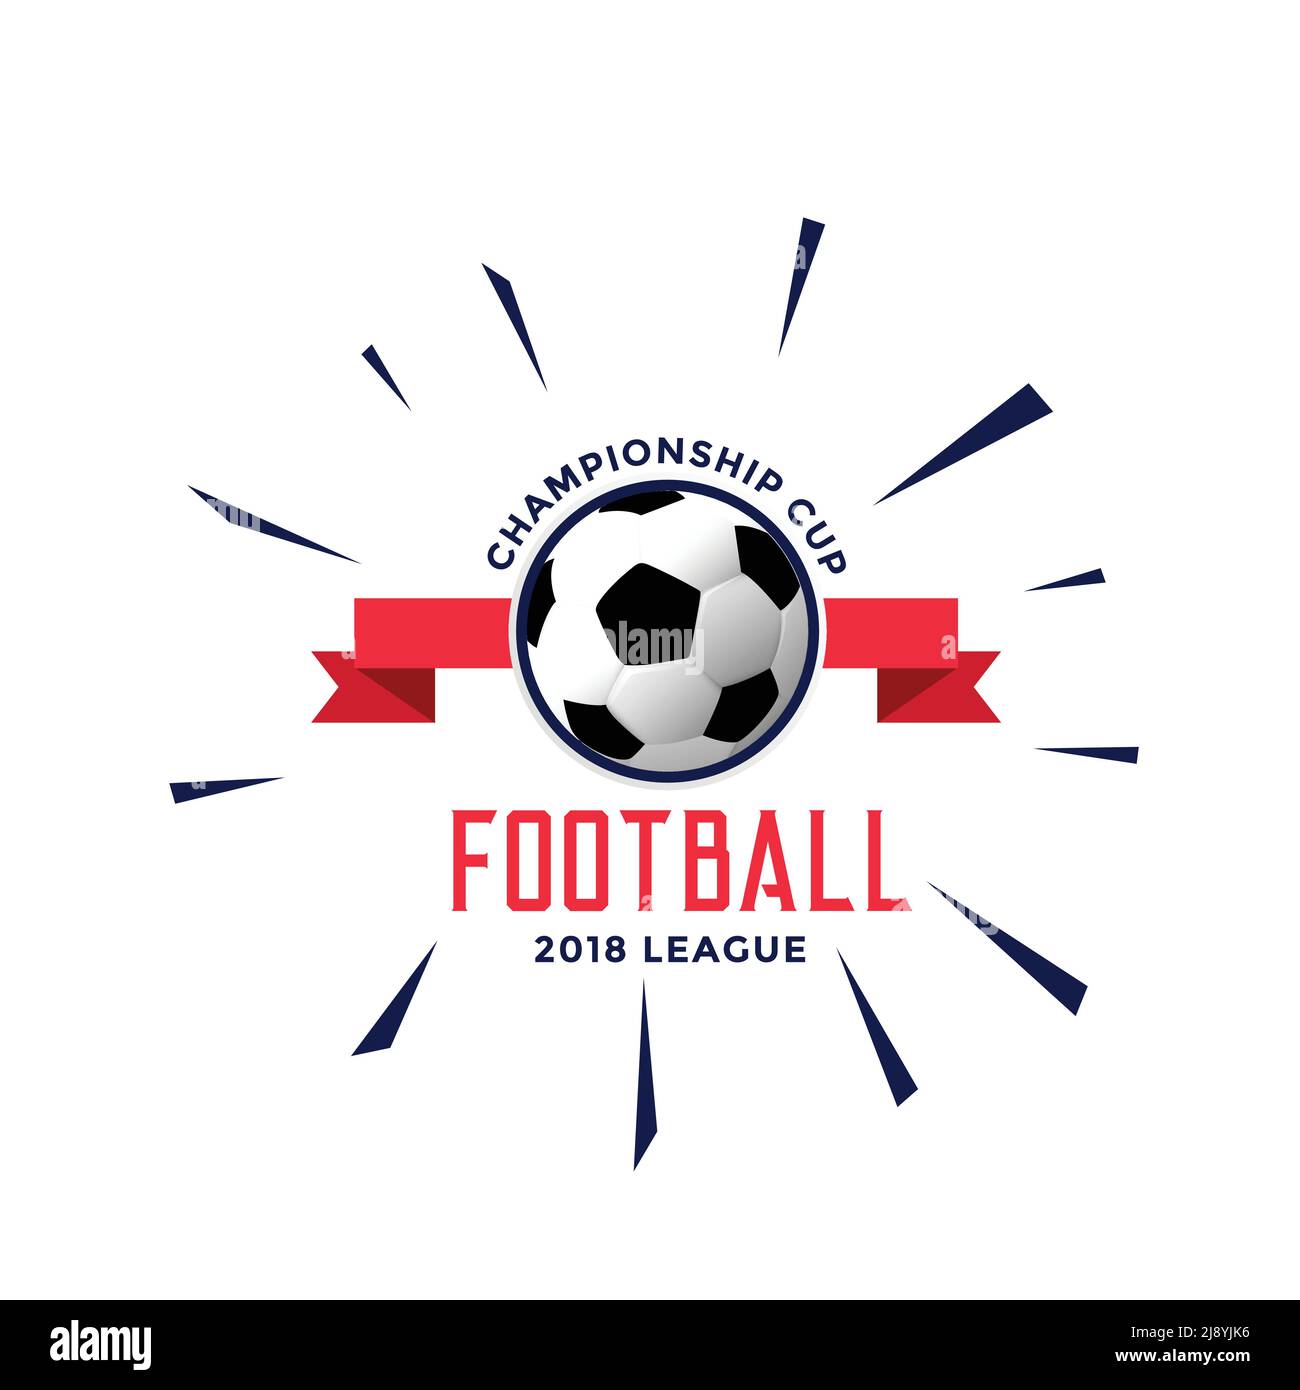 Fifa logo Cut Out Stock Images & Pictures - Alamy